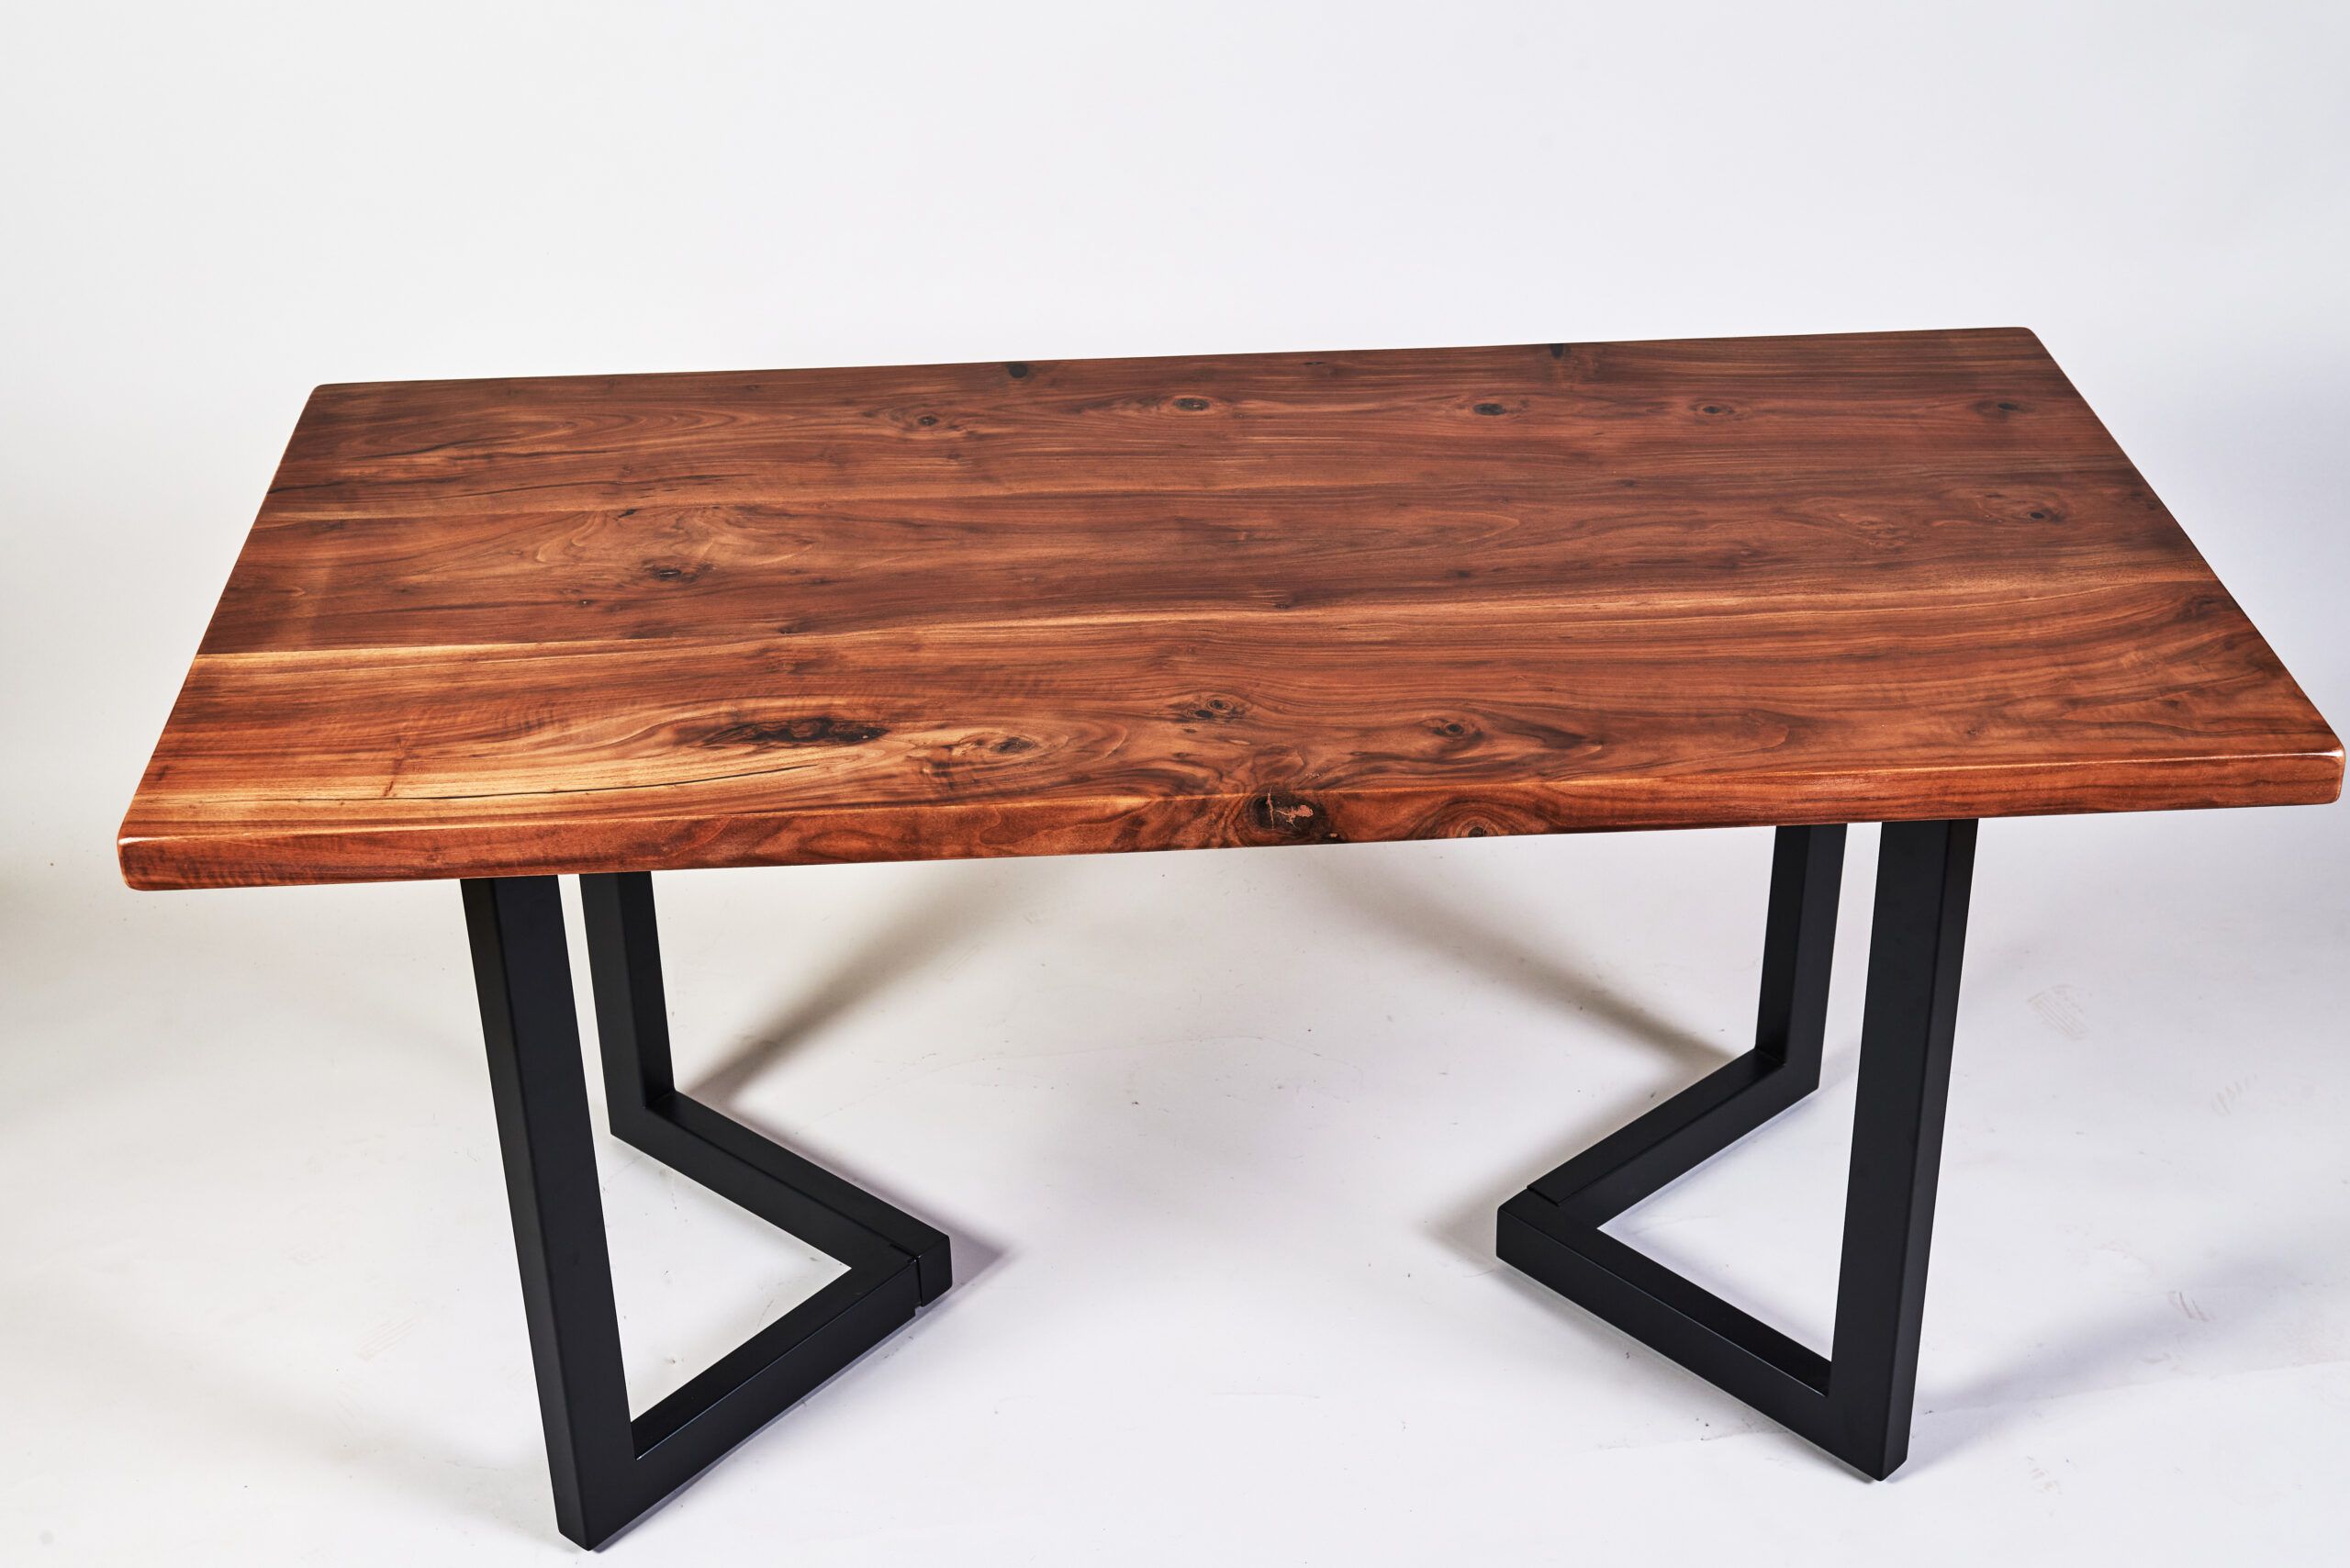 Black Walnut Live Edge Dining Table [San Francisco Bay Area] Throughout Most Recently Released Dark Walnut And Black Dining Tables (View 2 of 15)